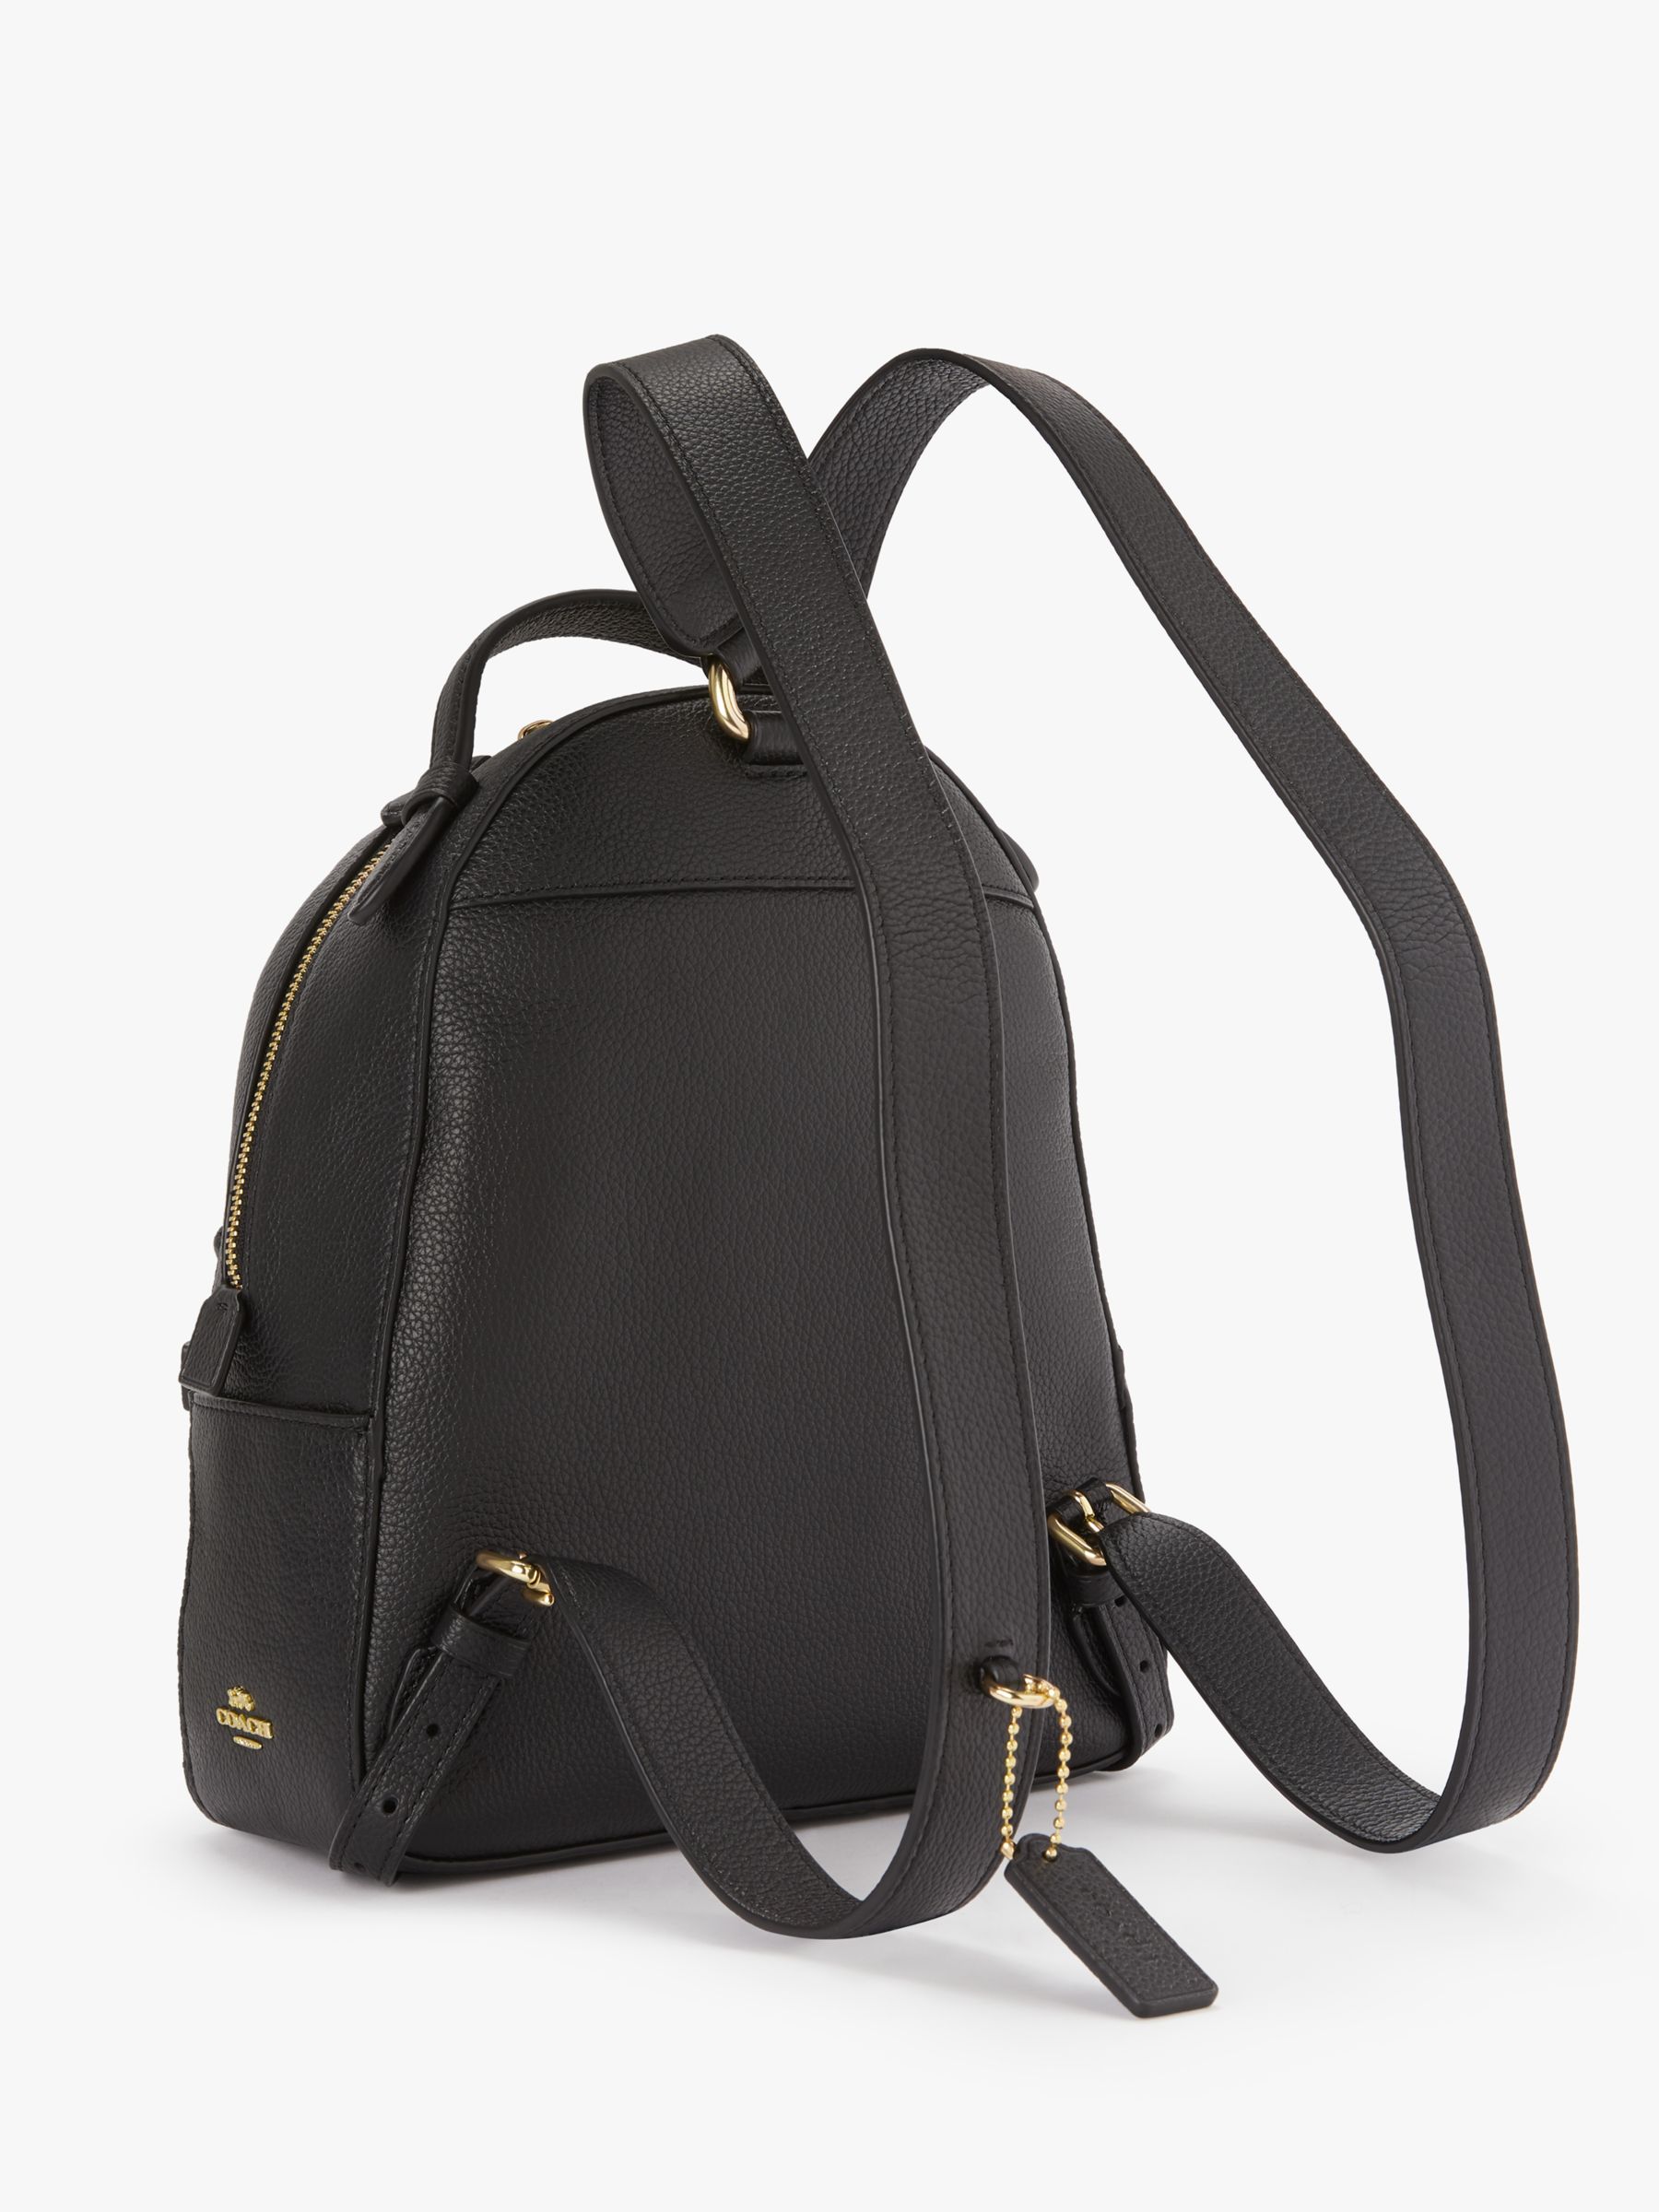 Coach Campus 23 Pebble Leather Backpack, Black